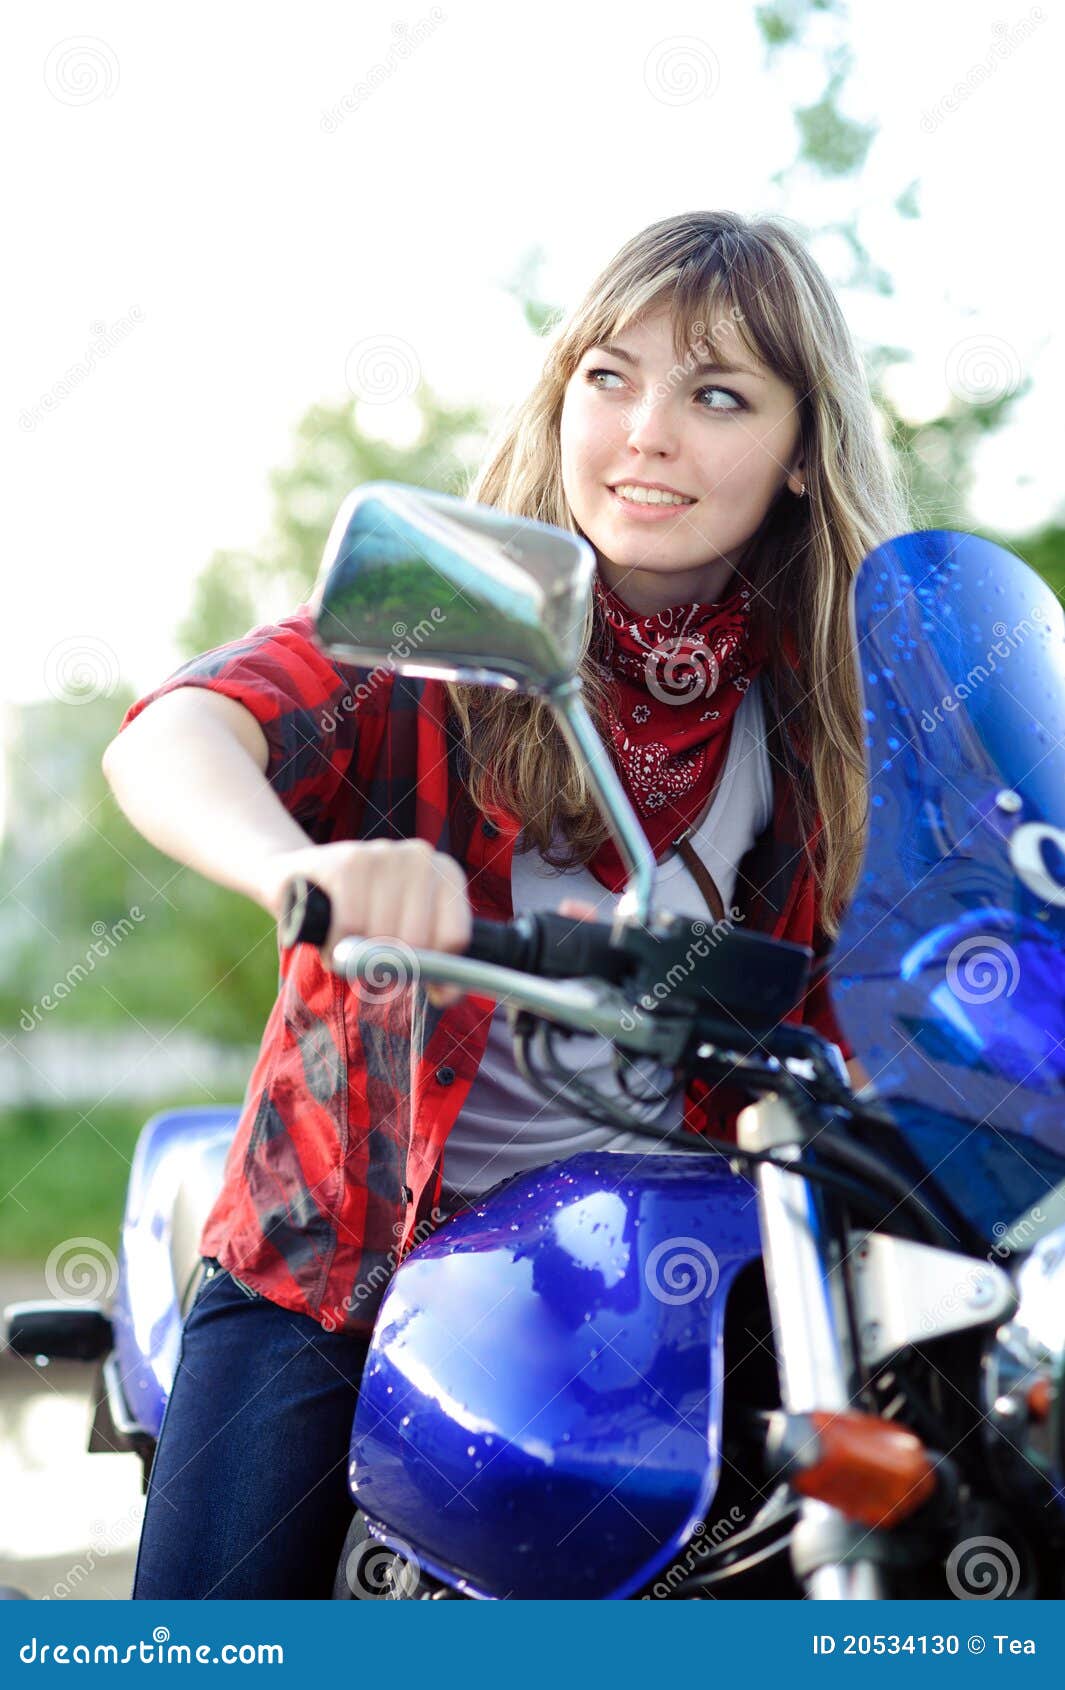 Teenager Girl Drive Blue Motorcycle Stock Photo - Image of portrait ...